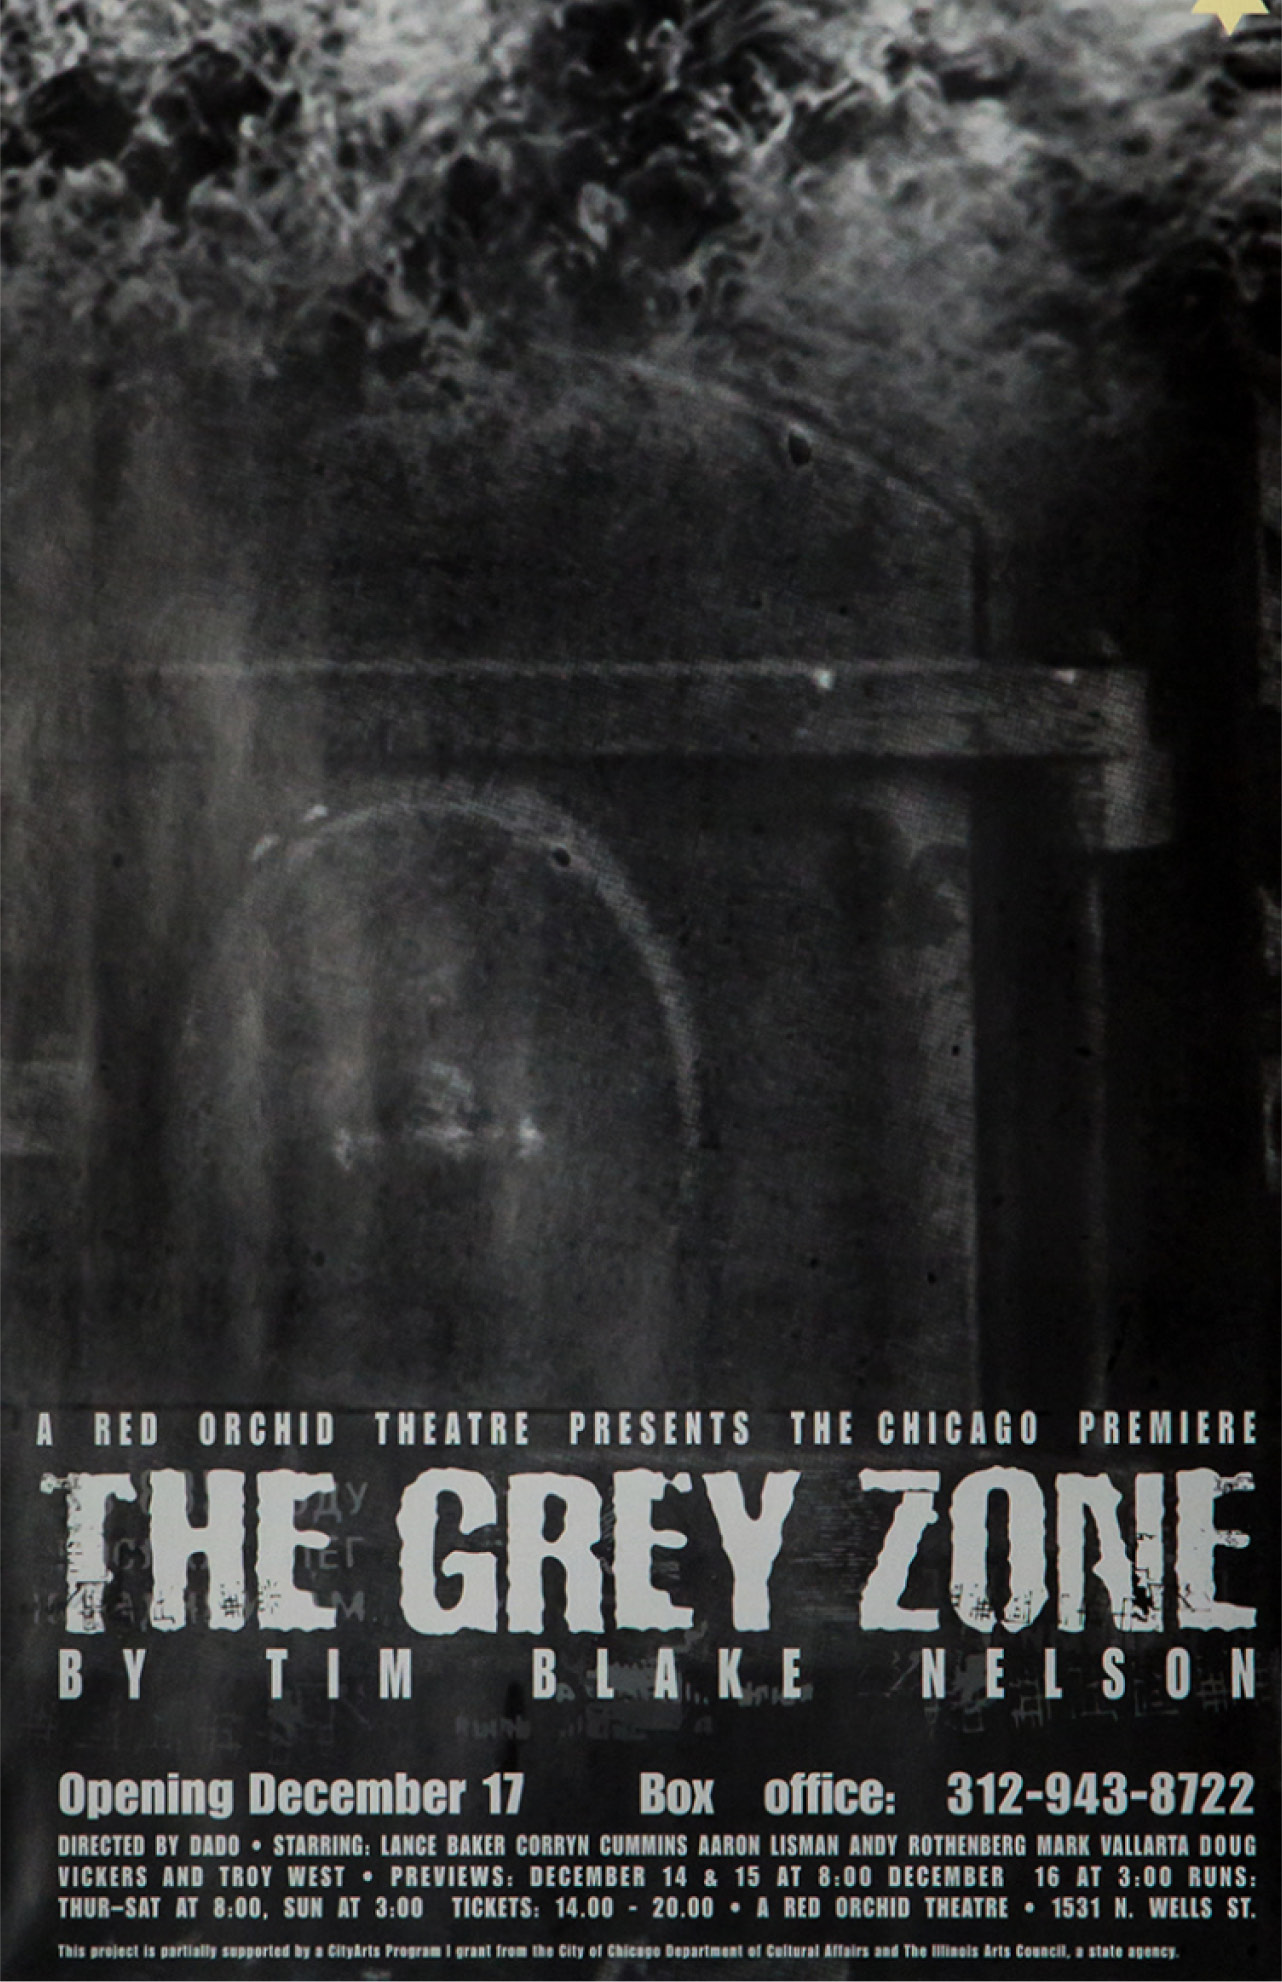 Midwest Premiere
The Grey Zone centers on the true account of survivor Dr. Myklos Nyiszli, a Jewish surgeon hand-picked by Joseph Mengele to conduct autopsies on Mengele’s questionably deceased “experiments”; and a selection of Hungarian Jews picked to work in sonderkommando (or Special Commando) units. Their duties are to assist in the heinous act of gassing and burning the incoming trainloads of Jews. At first concerned solely with their own survival Dr. Nyiszli and the sonderkommando find they have given up too much and must fight back in order to save their humanity. The Grey Zone examines the Holocaust not as the abstract horror we have learned but as a real, visceral story that can illustrate the greater truth of what it means to face terrorism with dignity and courage.